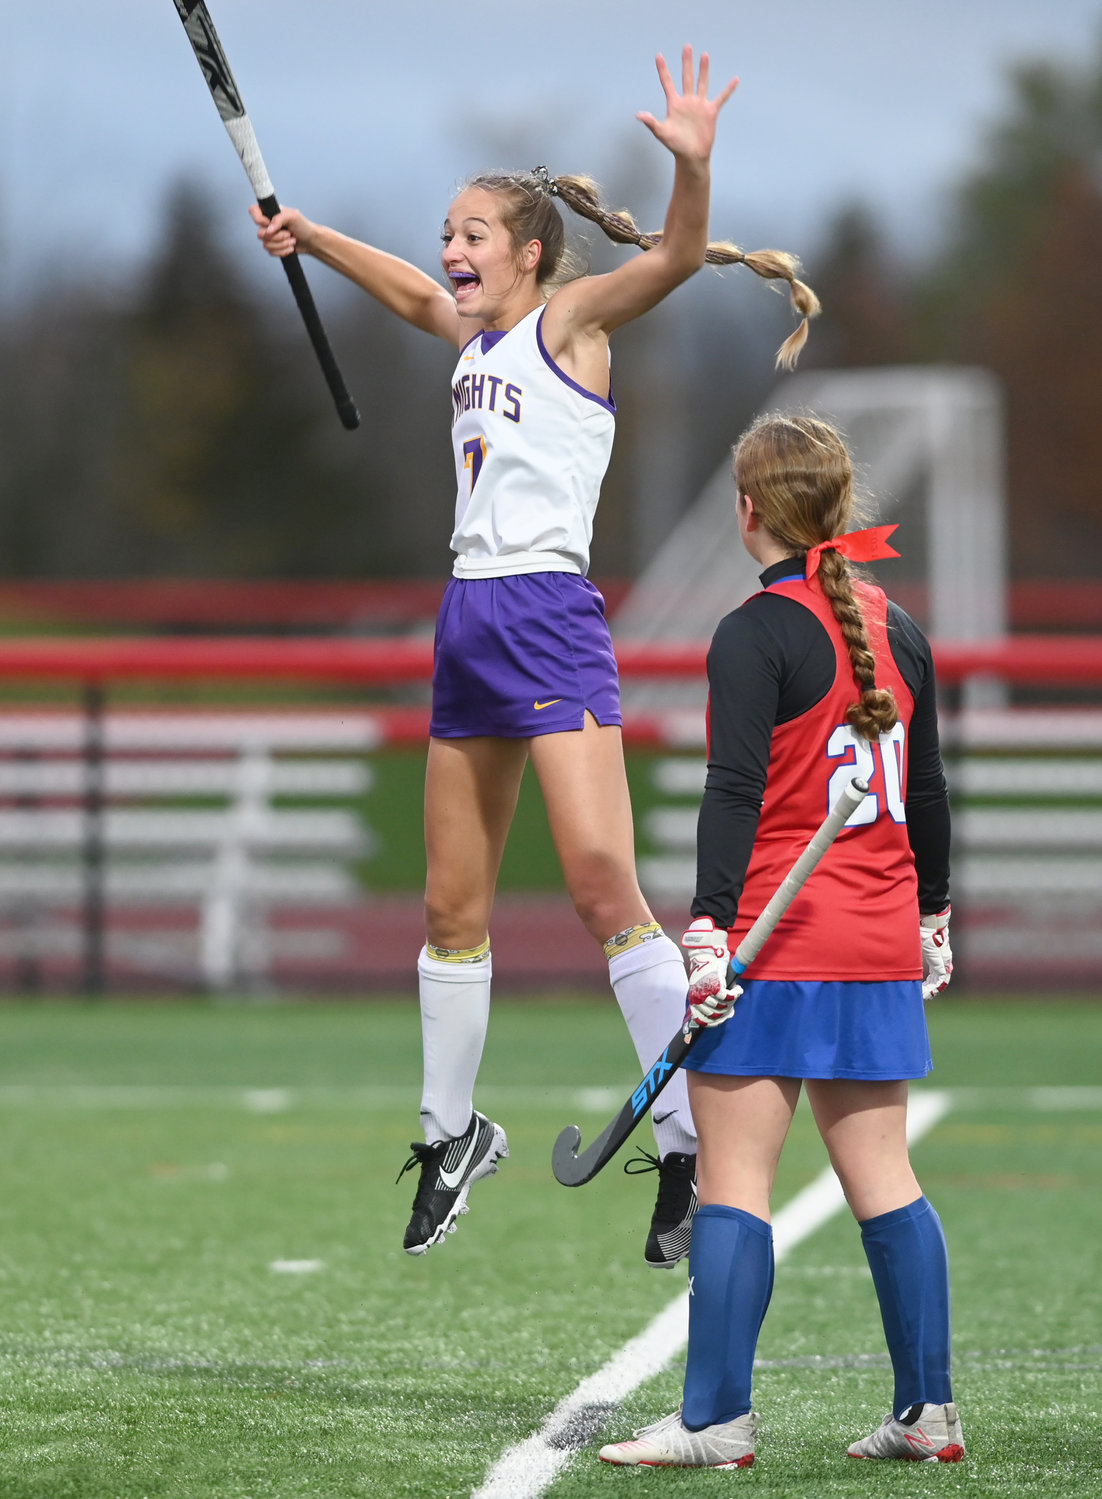 CHAMPIONSHIP GOAL — Holland Patent’s Alivia Alexander jumps high in the air after scoring her first goal of the Section III Class B title game against New Hartford Sunday at Vernon-Verona-Sherrill High School. It was her first of two goals in the Golden Knights’ 6-0 win. New Hartford’s Sienna Holmes looks on.